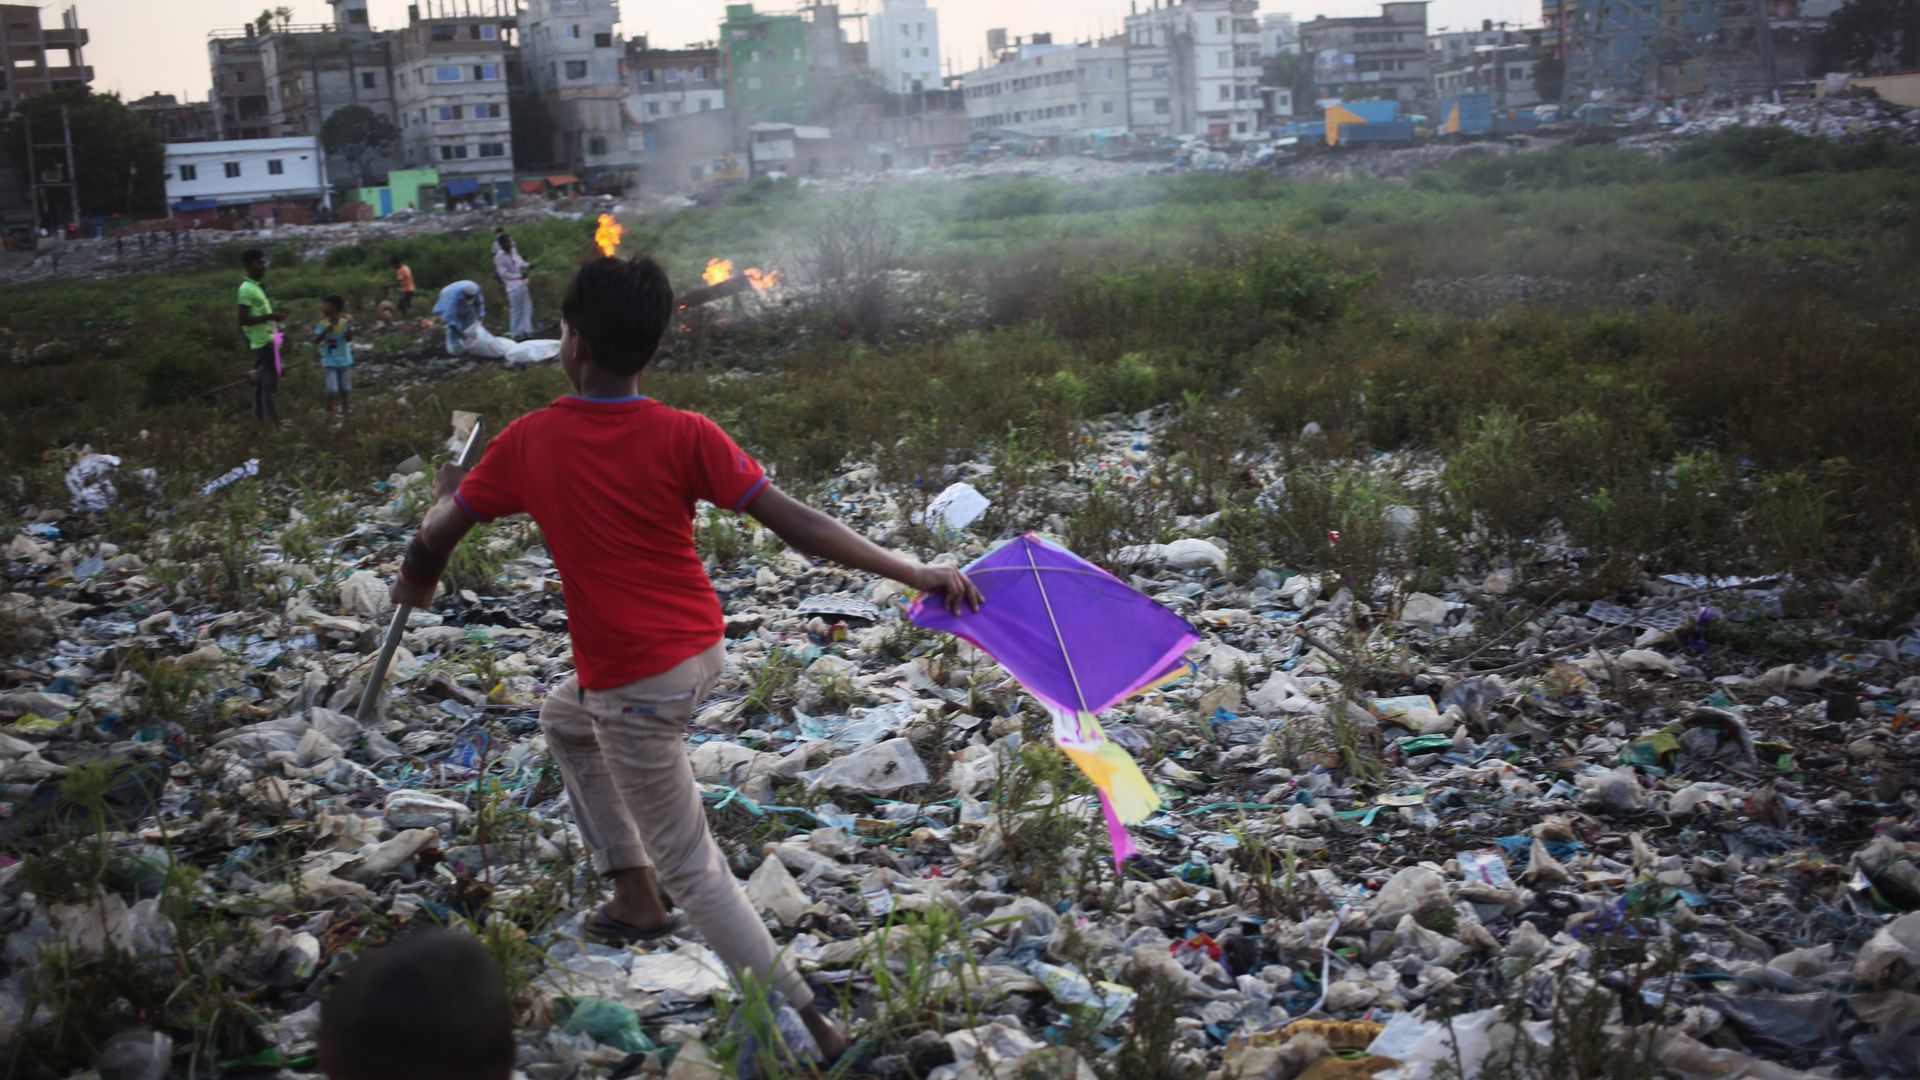 In this image, a boy in a bright shirt carries a kite while running over a field of garbage.